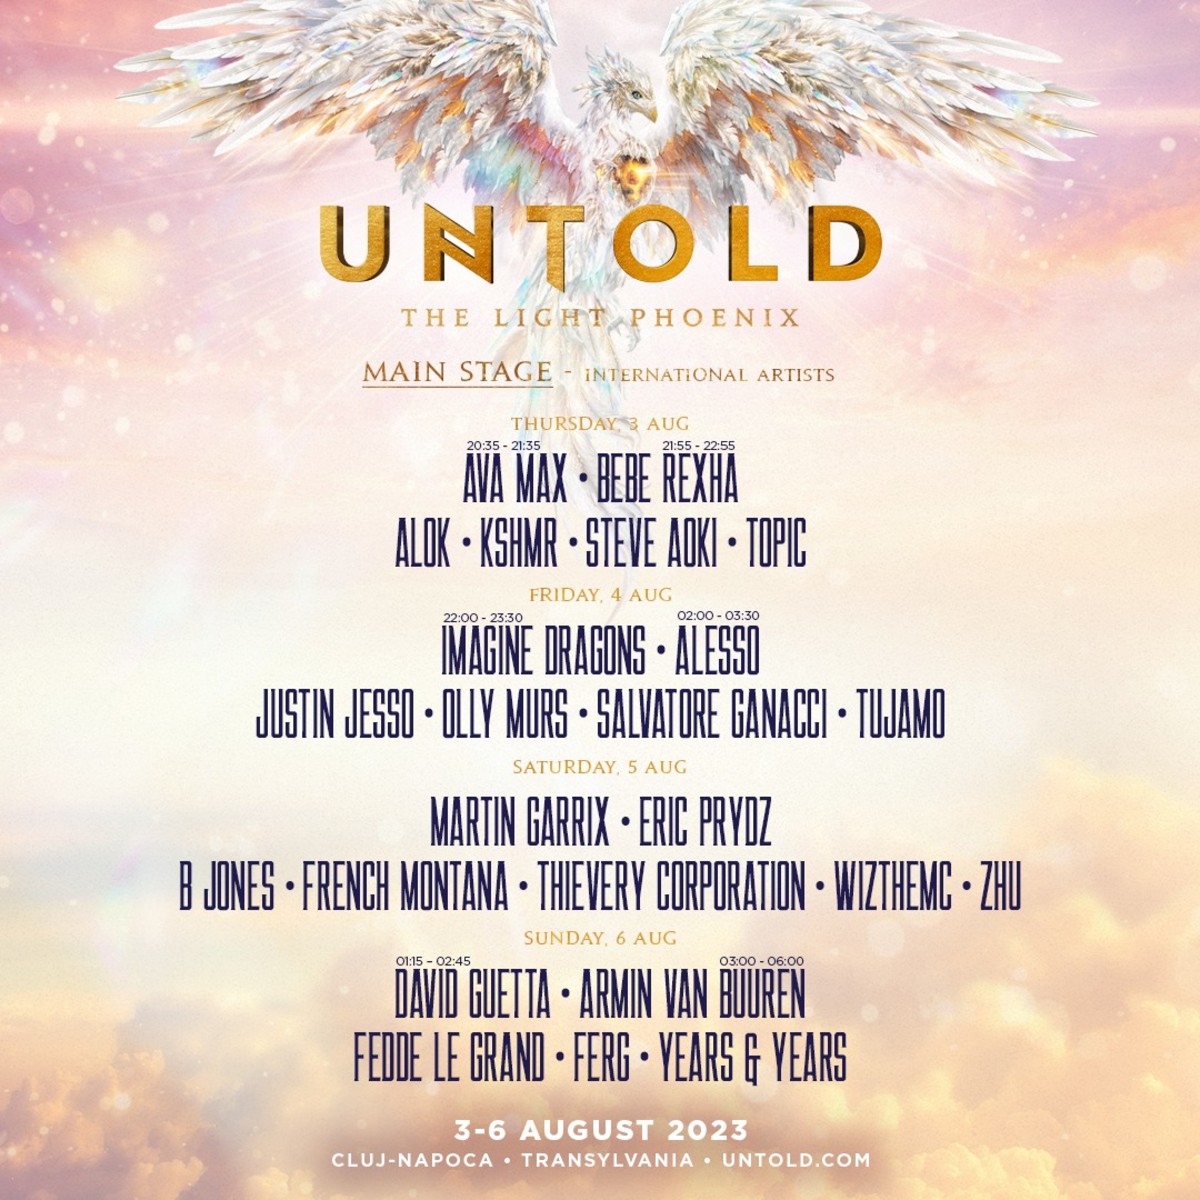 Here’s How Much It Costs to Attend UNTOLD Festival 2023 The